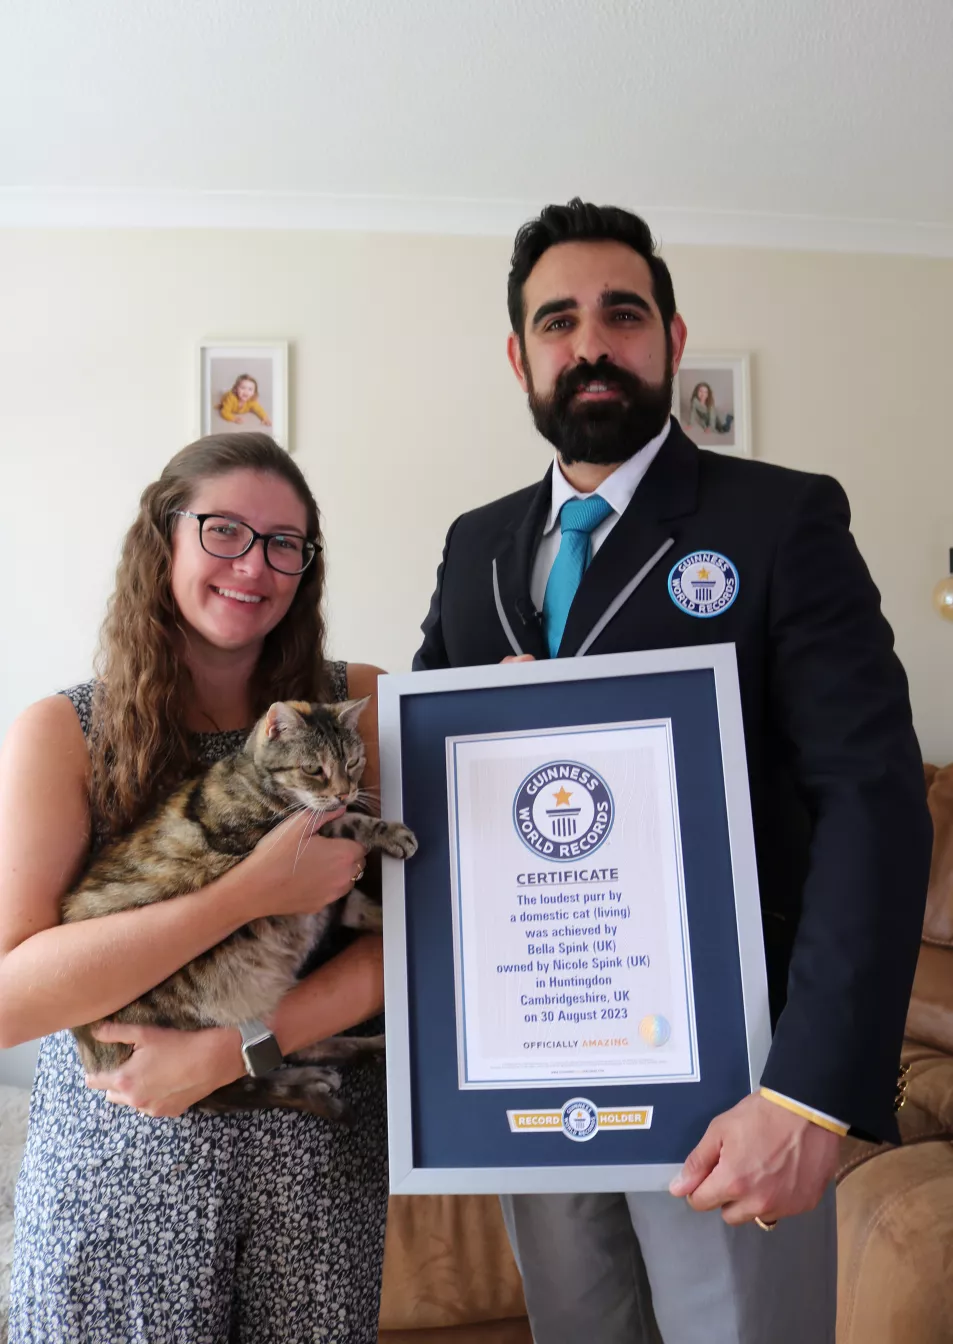 Cat owner holding pet stood next to Guinness World Record adjudicator holding certificate